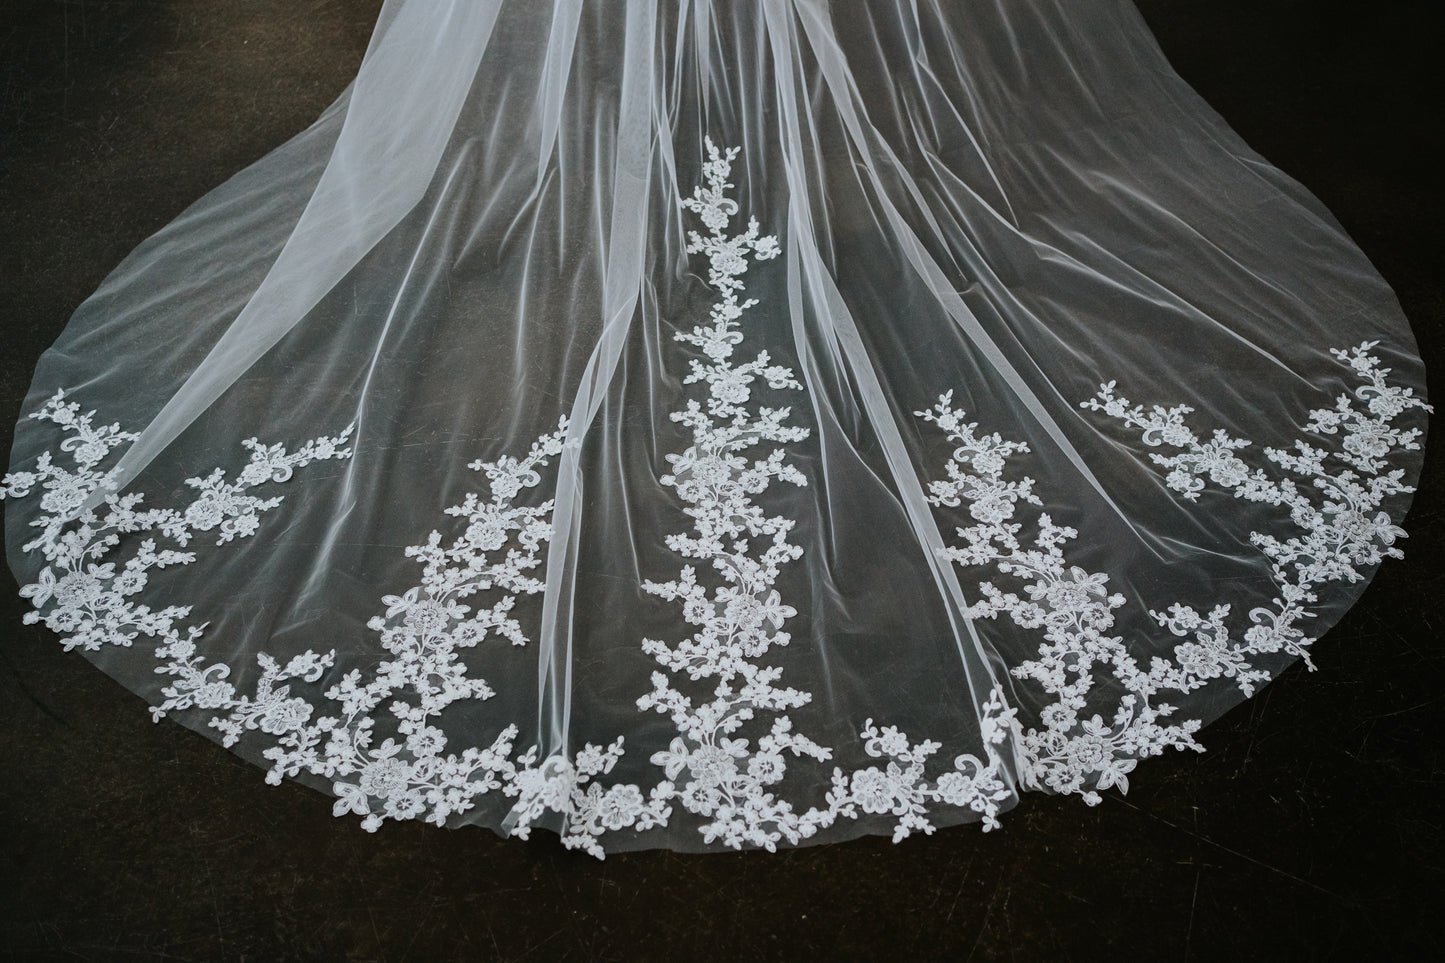 Cathedral Length Lace Veil with Comb